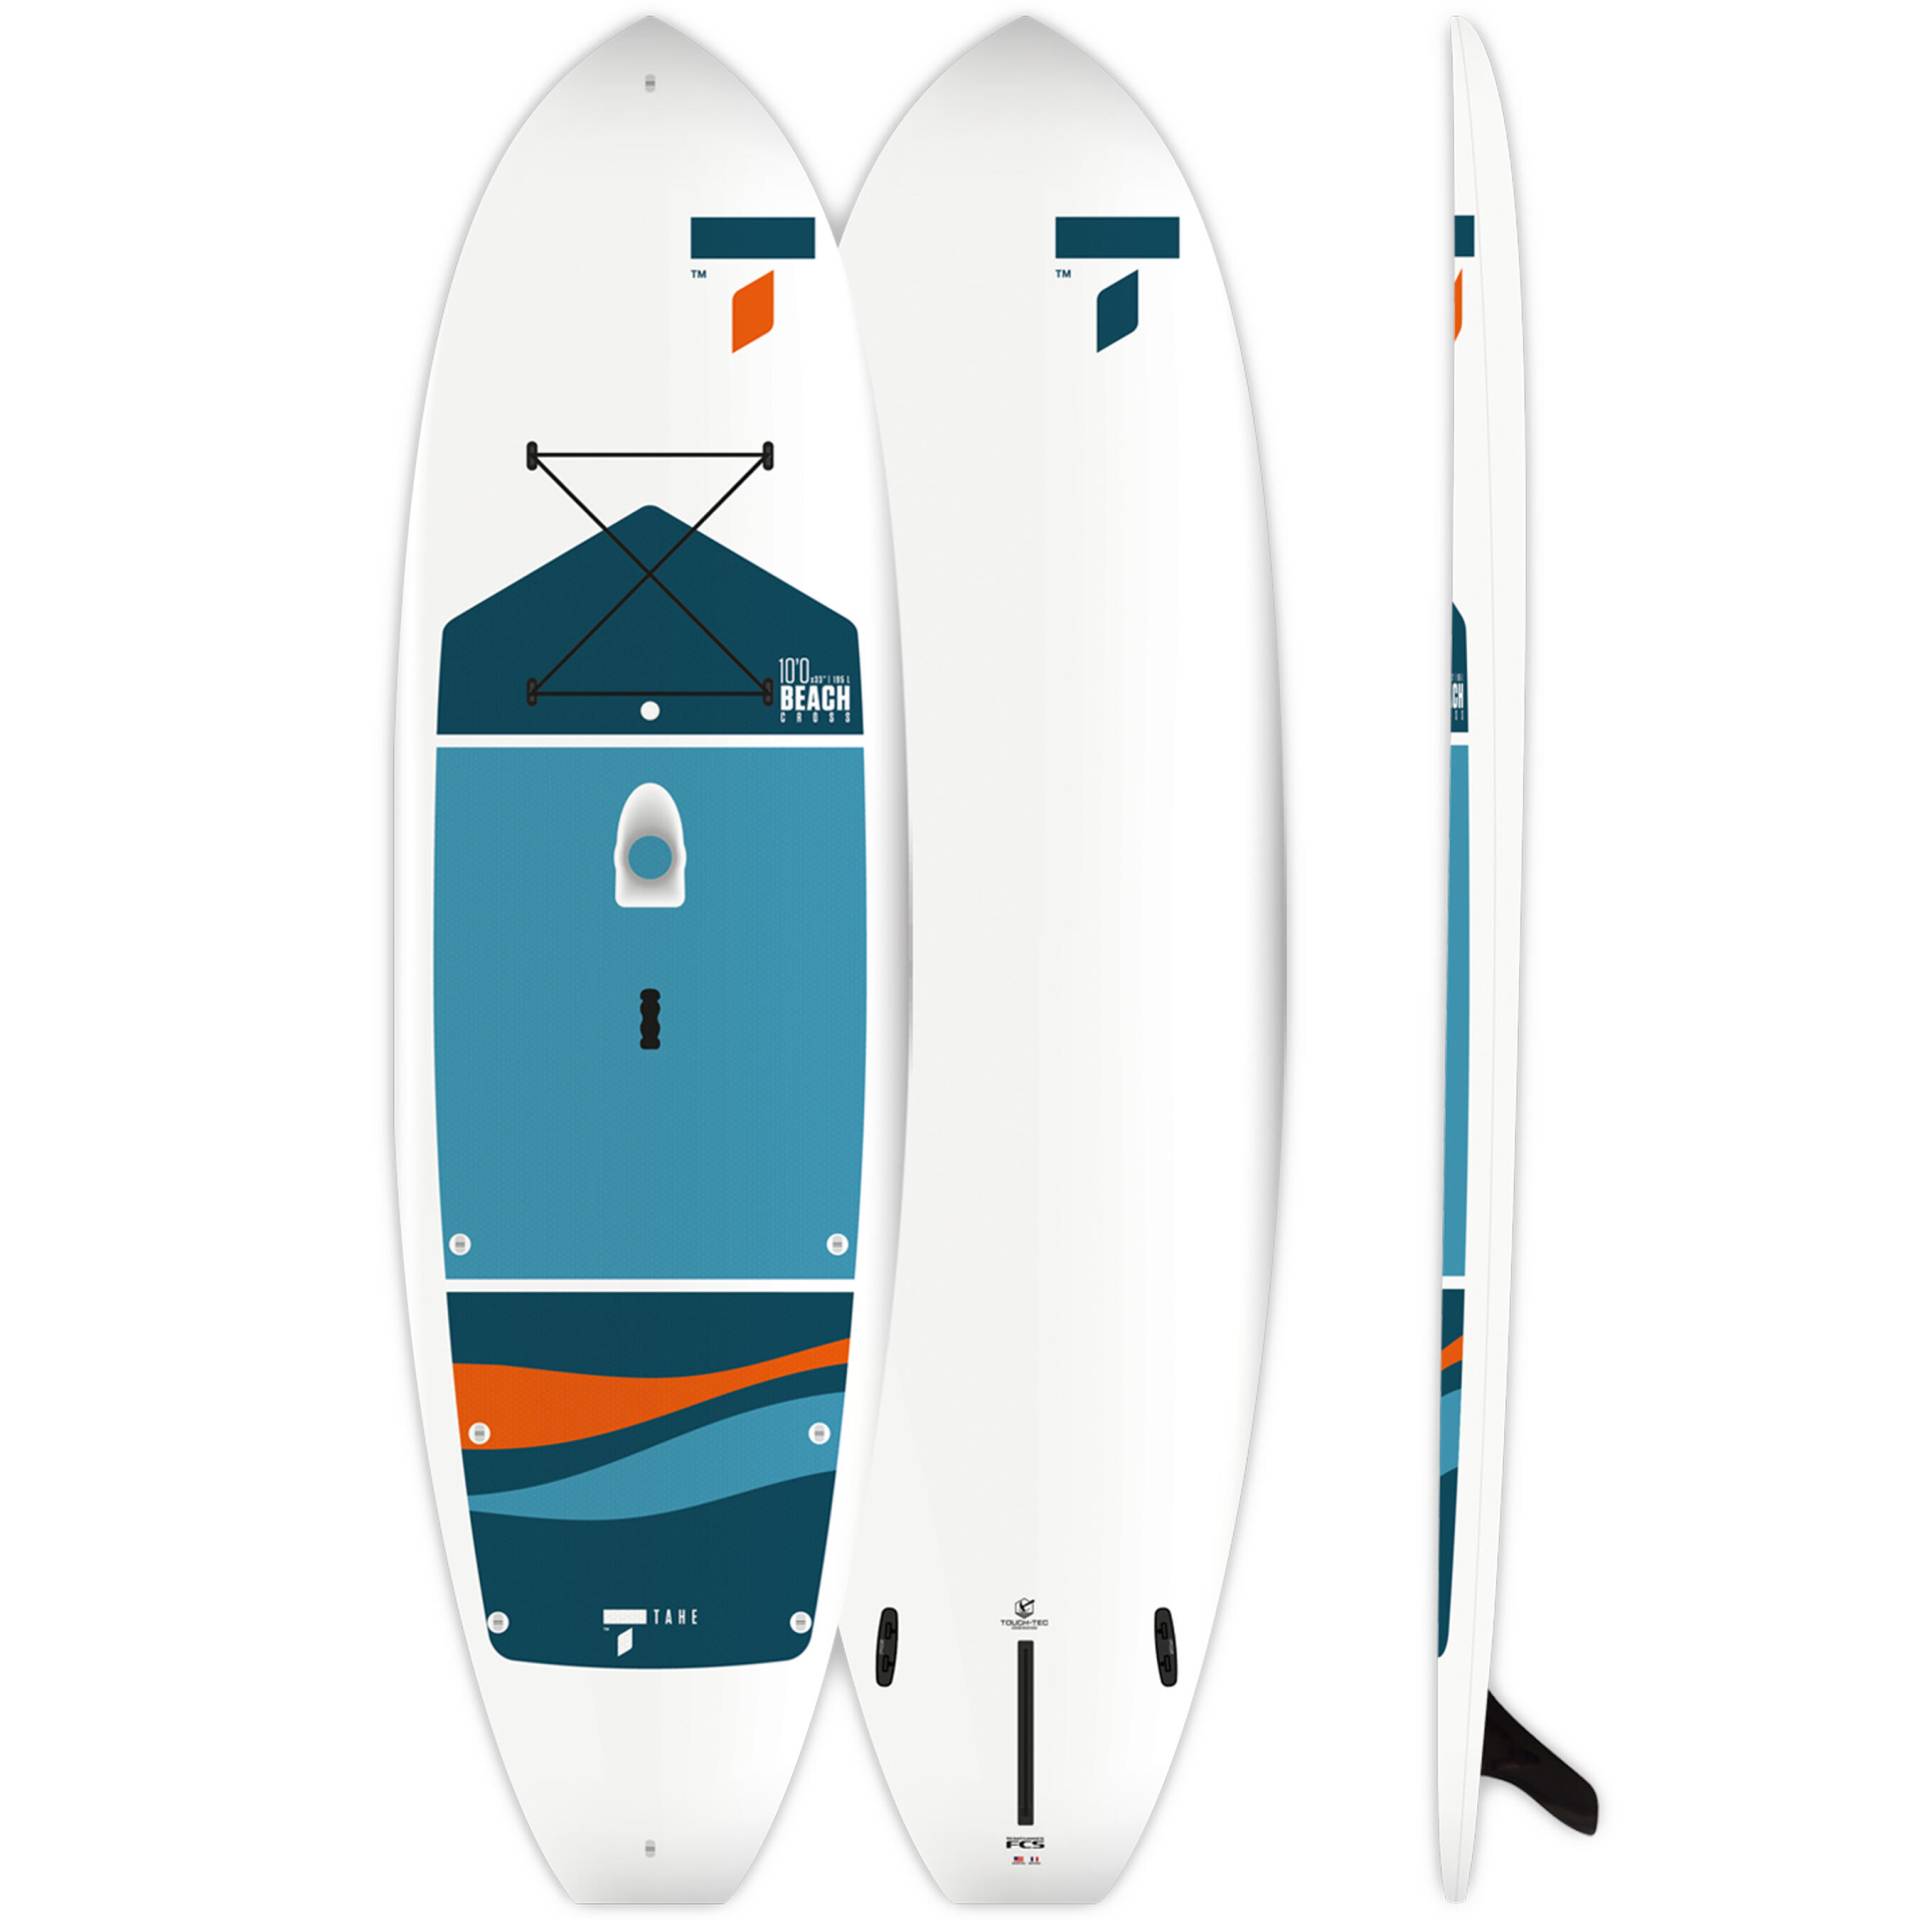 Stand Up Paddle Hardboard Beach Cross (10' / 33" / 4.75") 195 L - Tahe von TAHE OUTDOORS